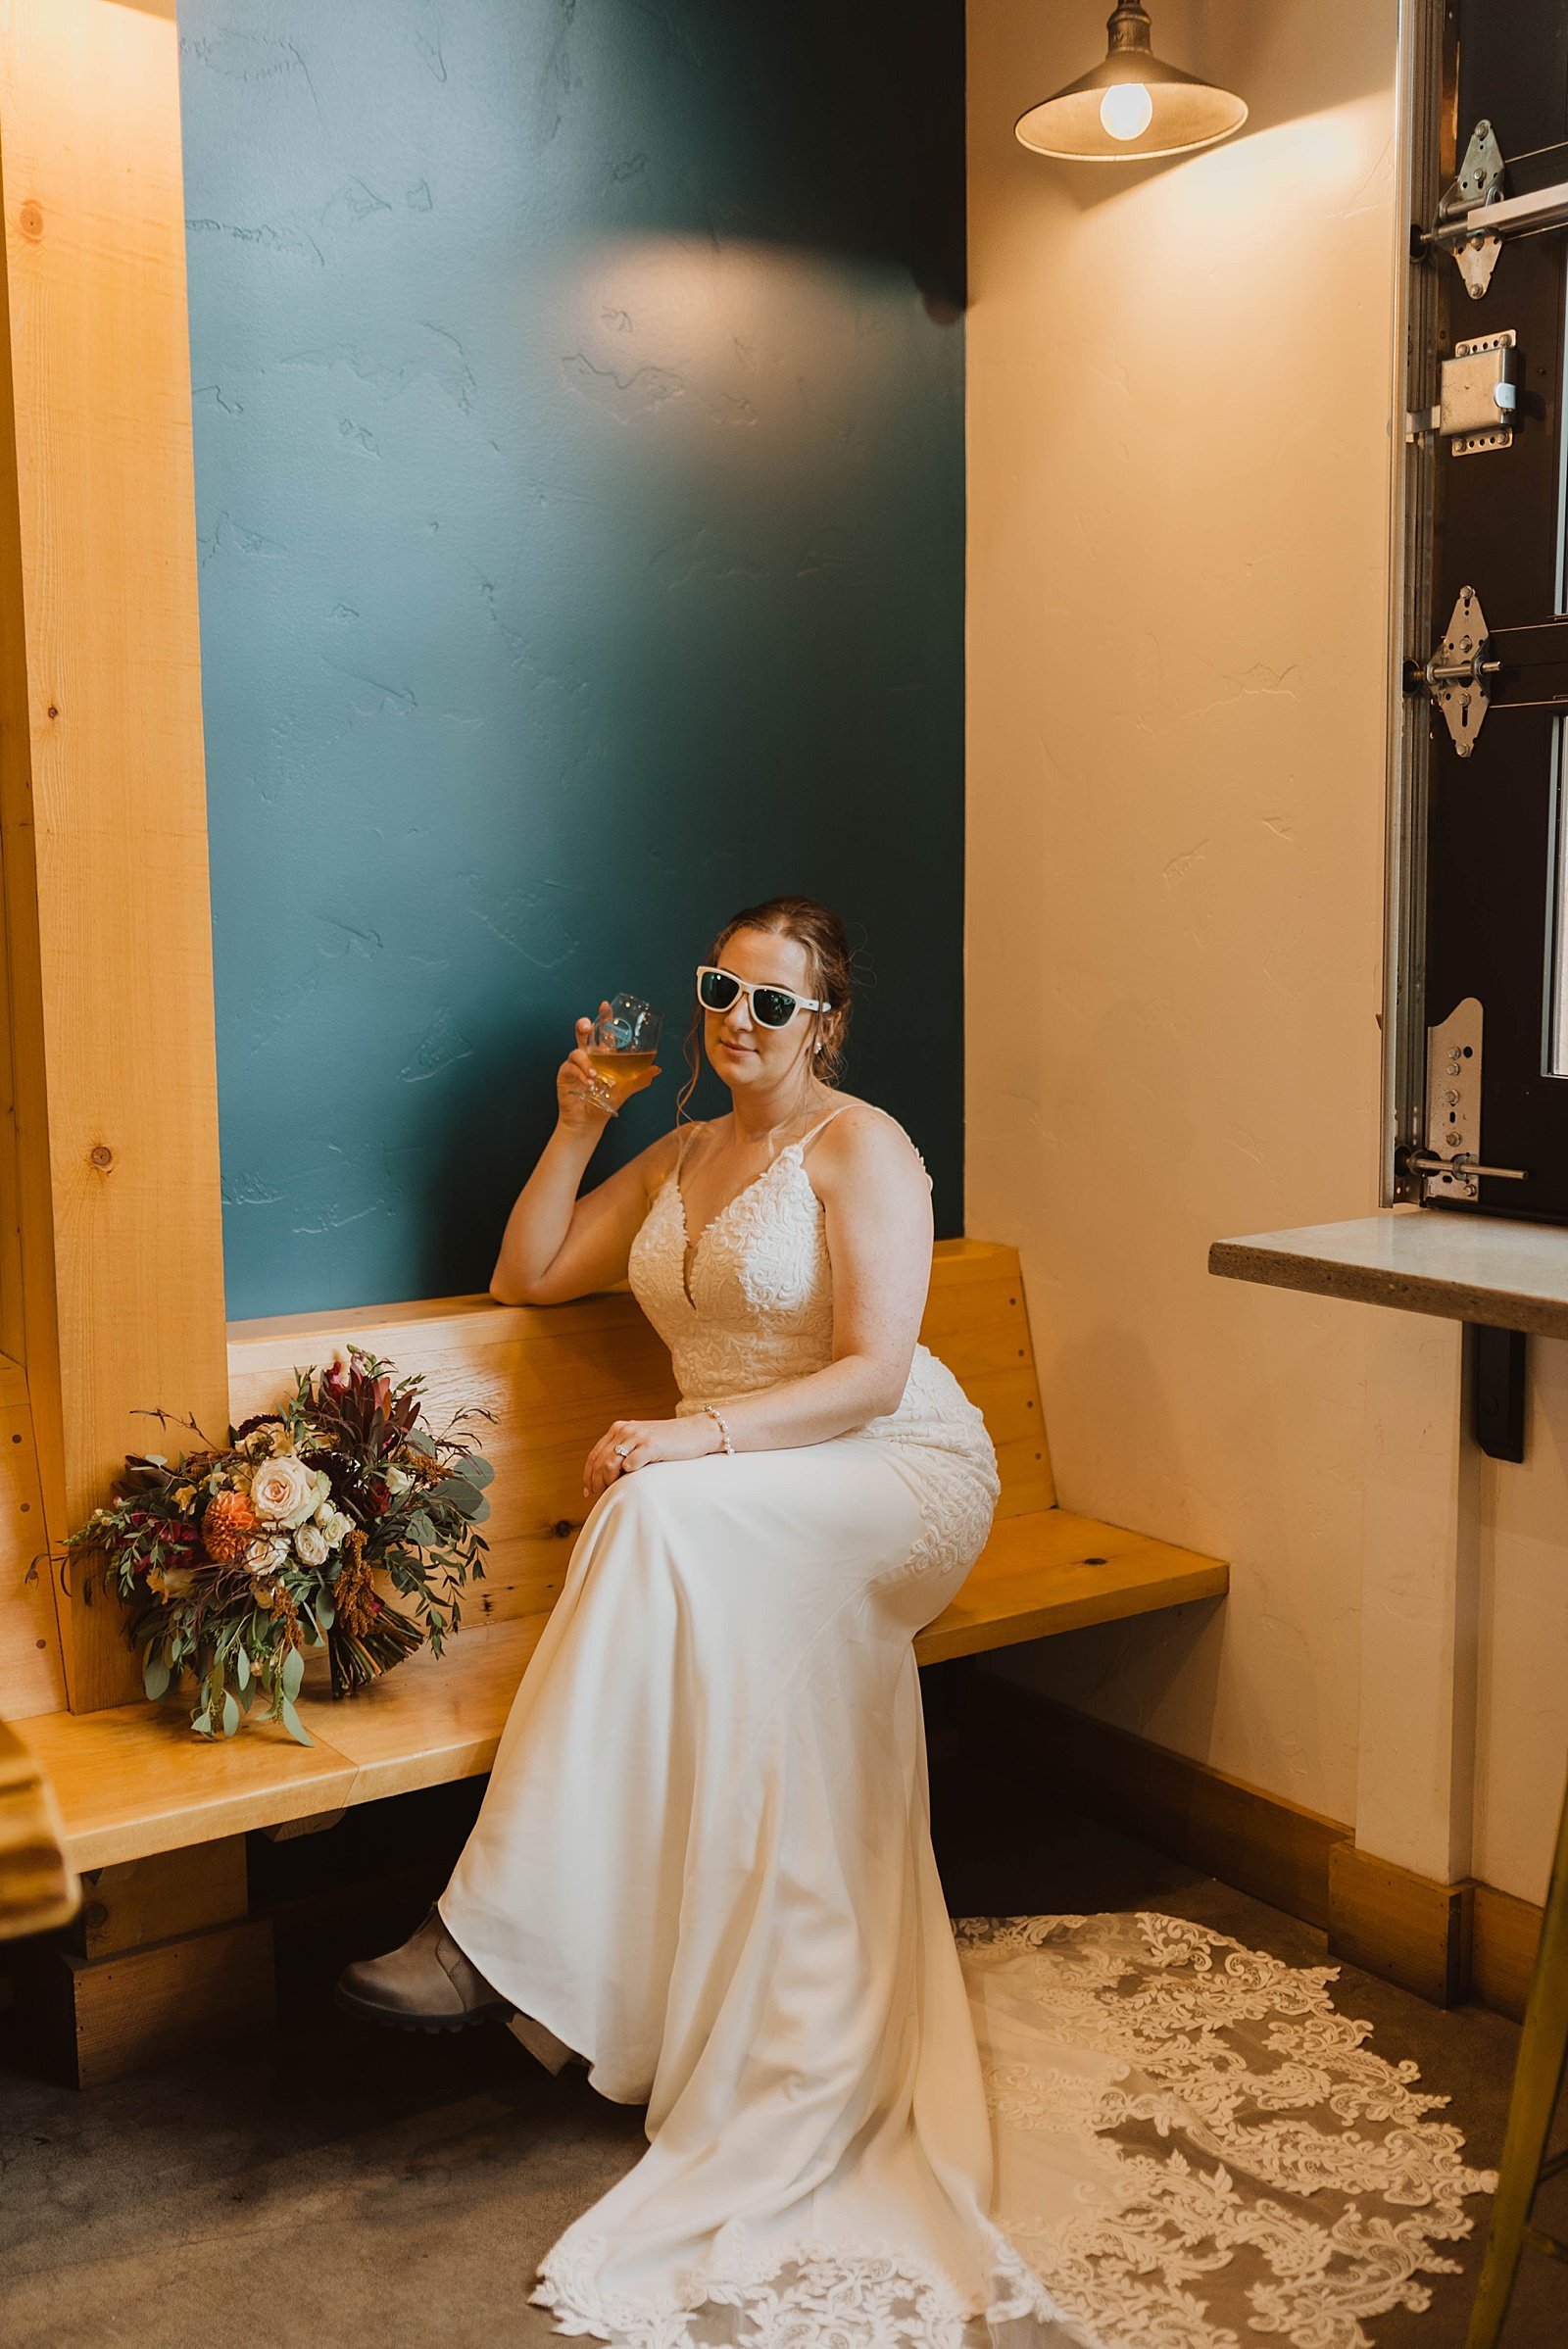  Bride sitting on a bench at a brewery with sunglasses on  